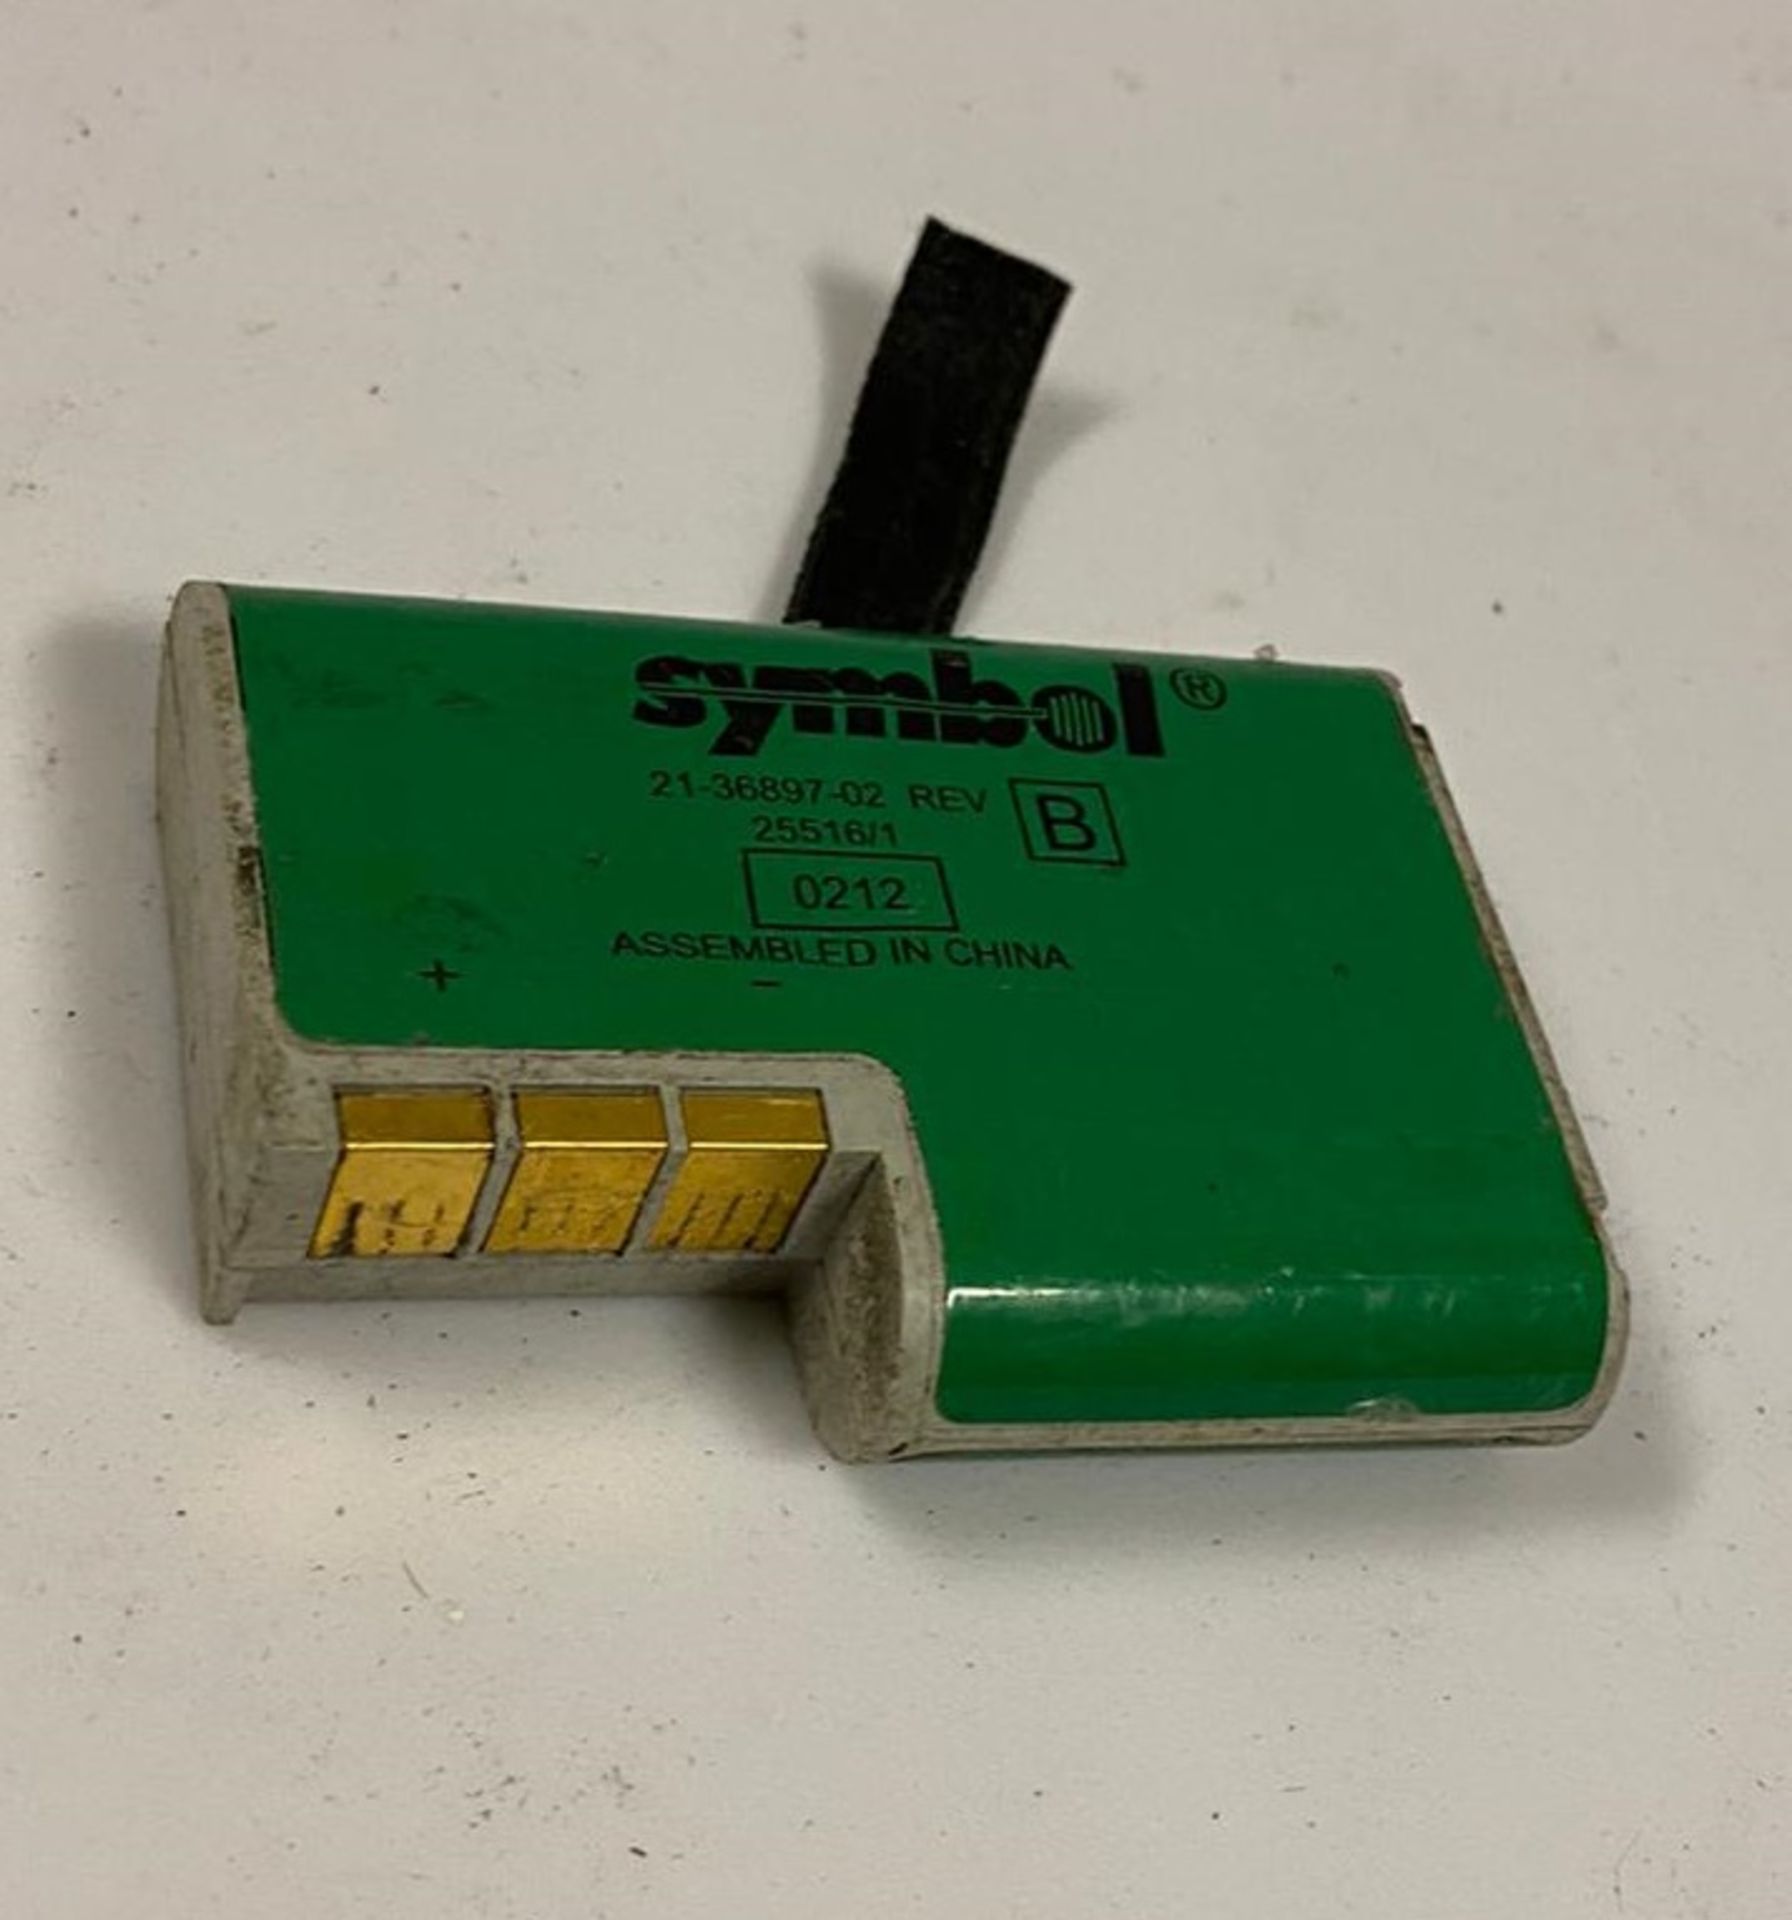 5 x Symbol 21-36897-02 Rechargeable 6.0V Batteries - Used Condition - Location: Altrincham WA14